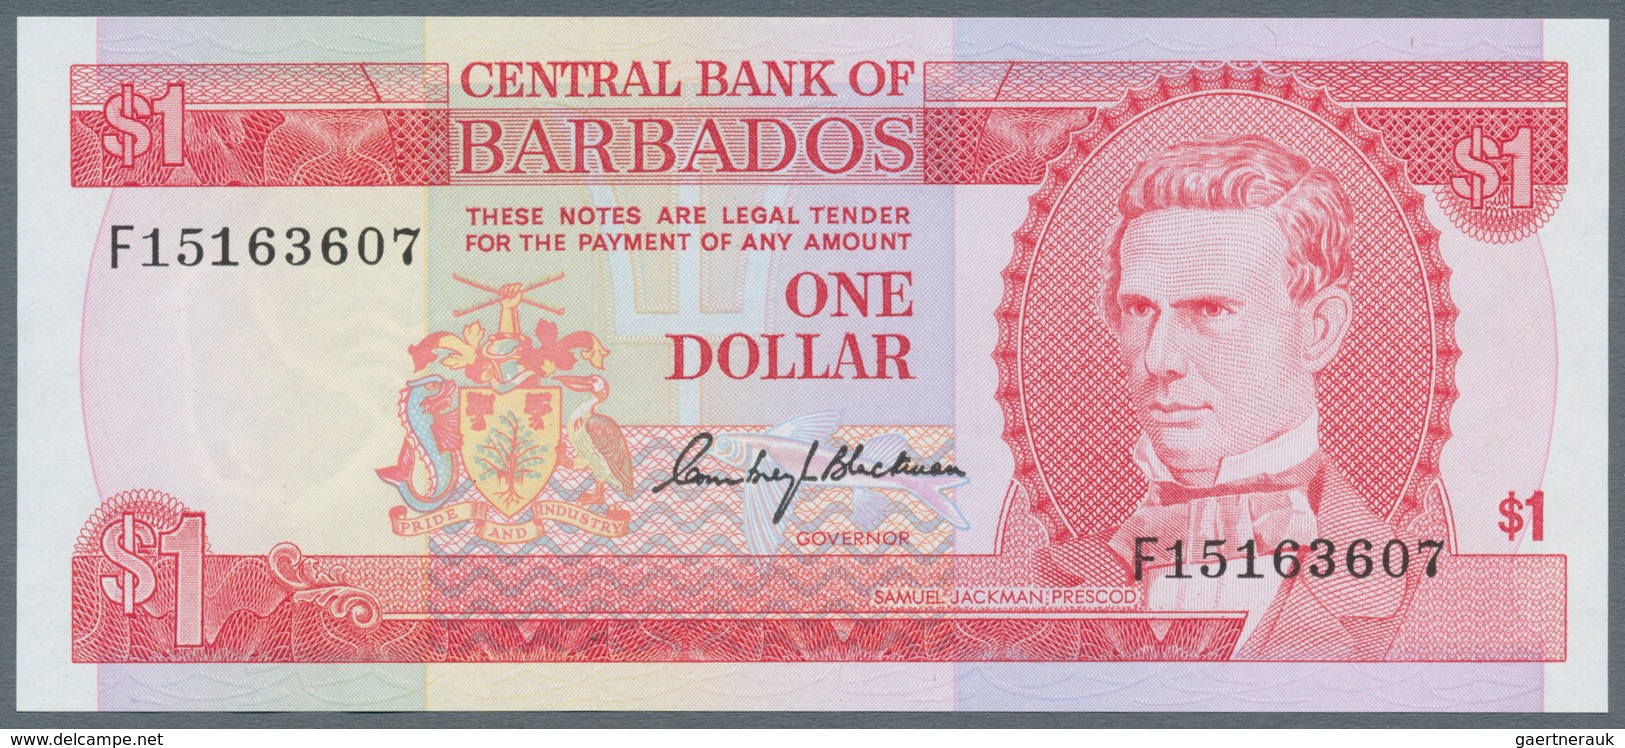 South America / Südamerika: larger lot of about 250 banknotes from America, mostly in UNC condition,